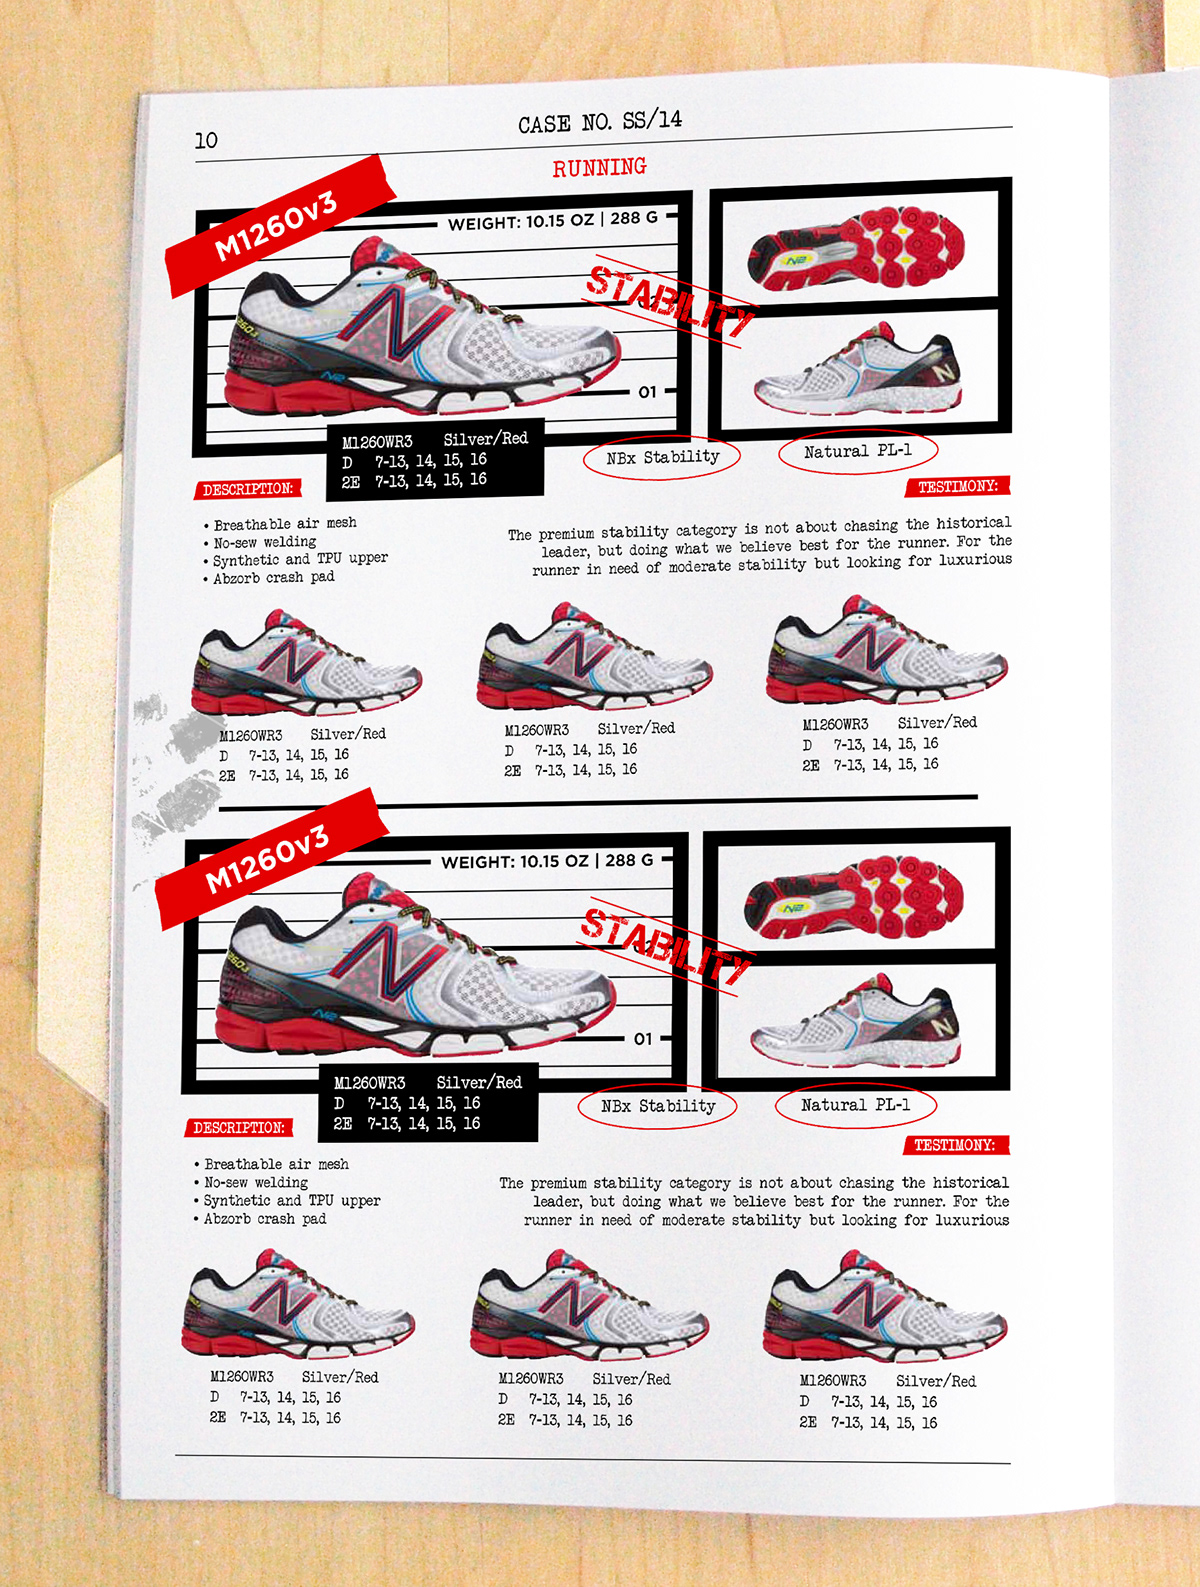 New Balance SS/14 Catalogue FBI case file wanted shoes footwear Performance